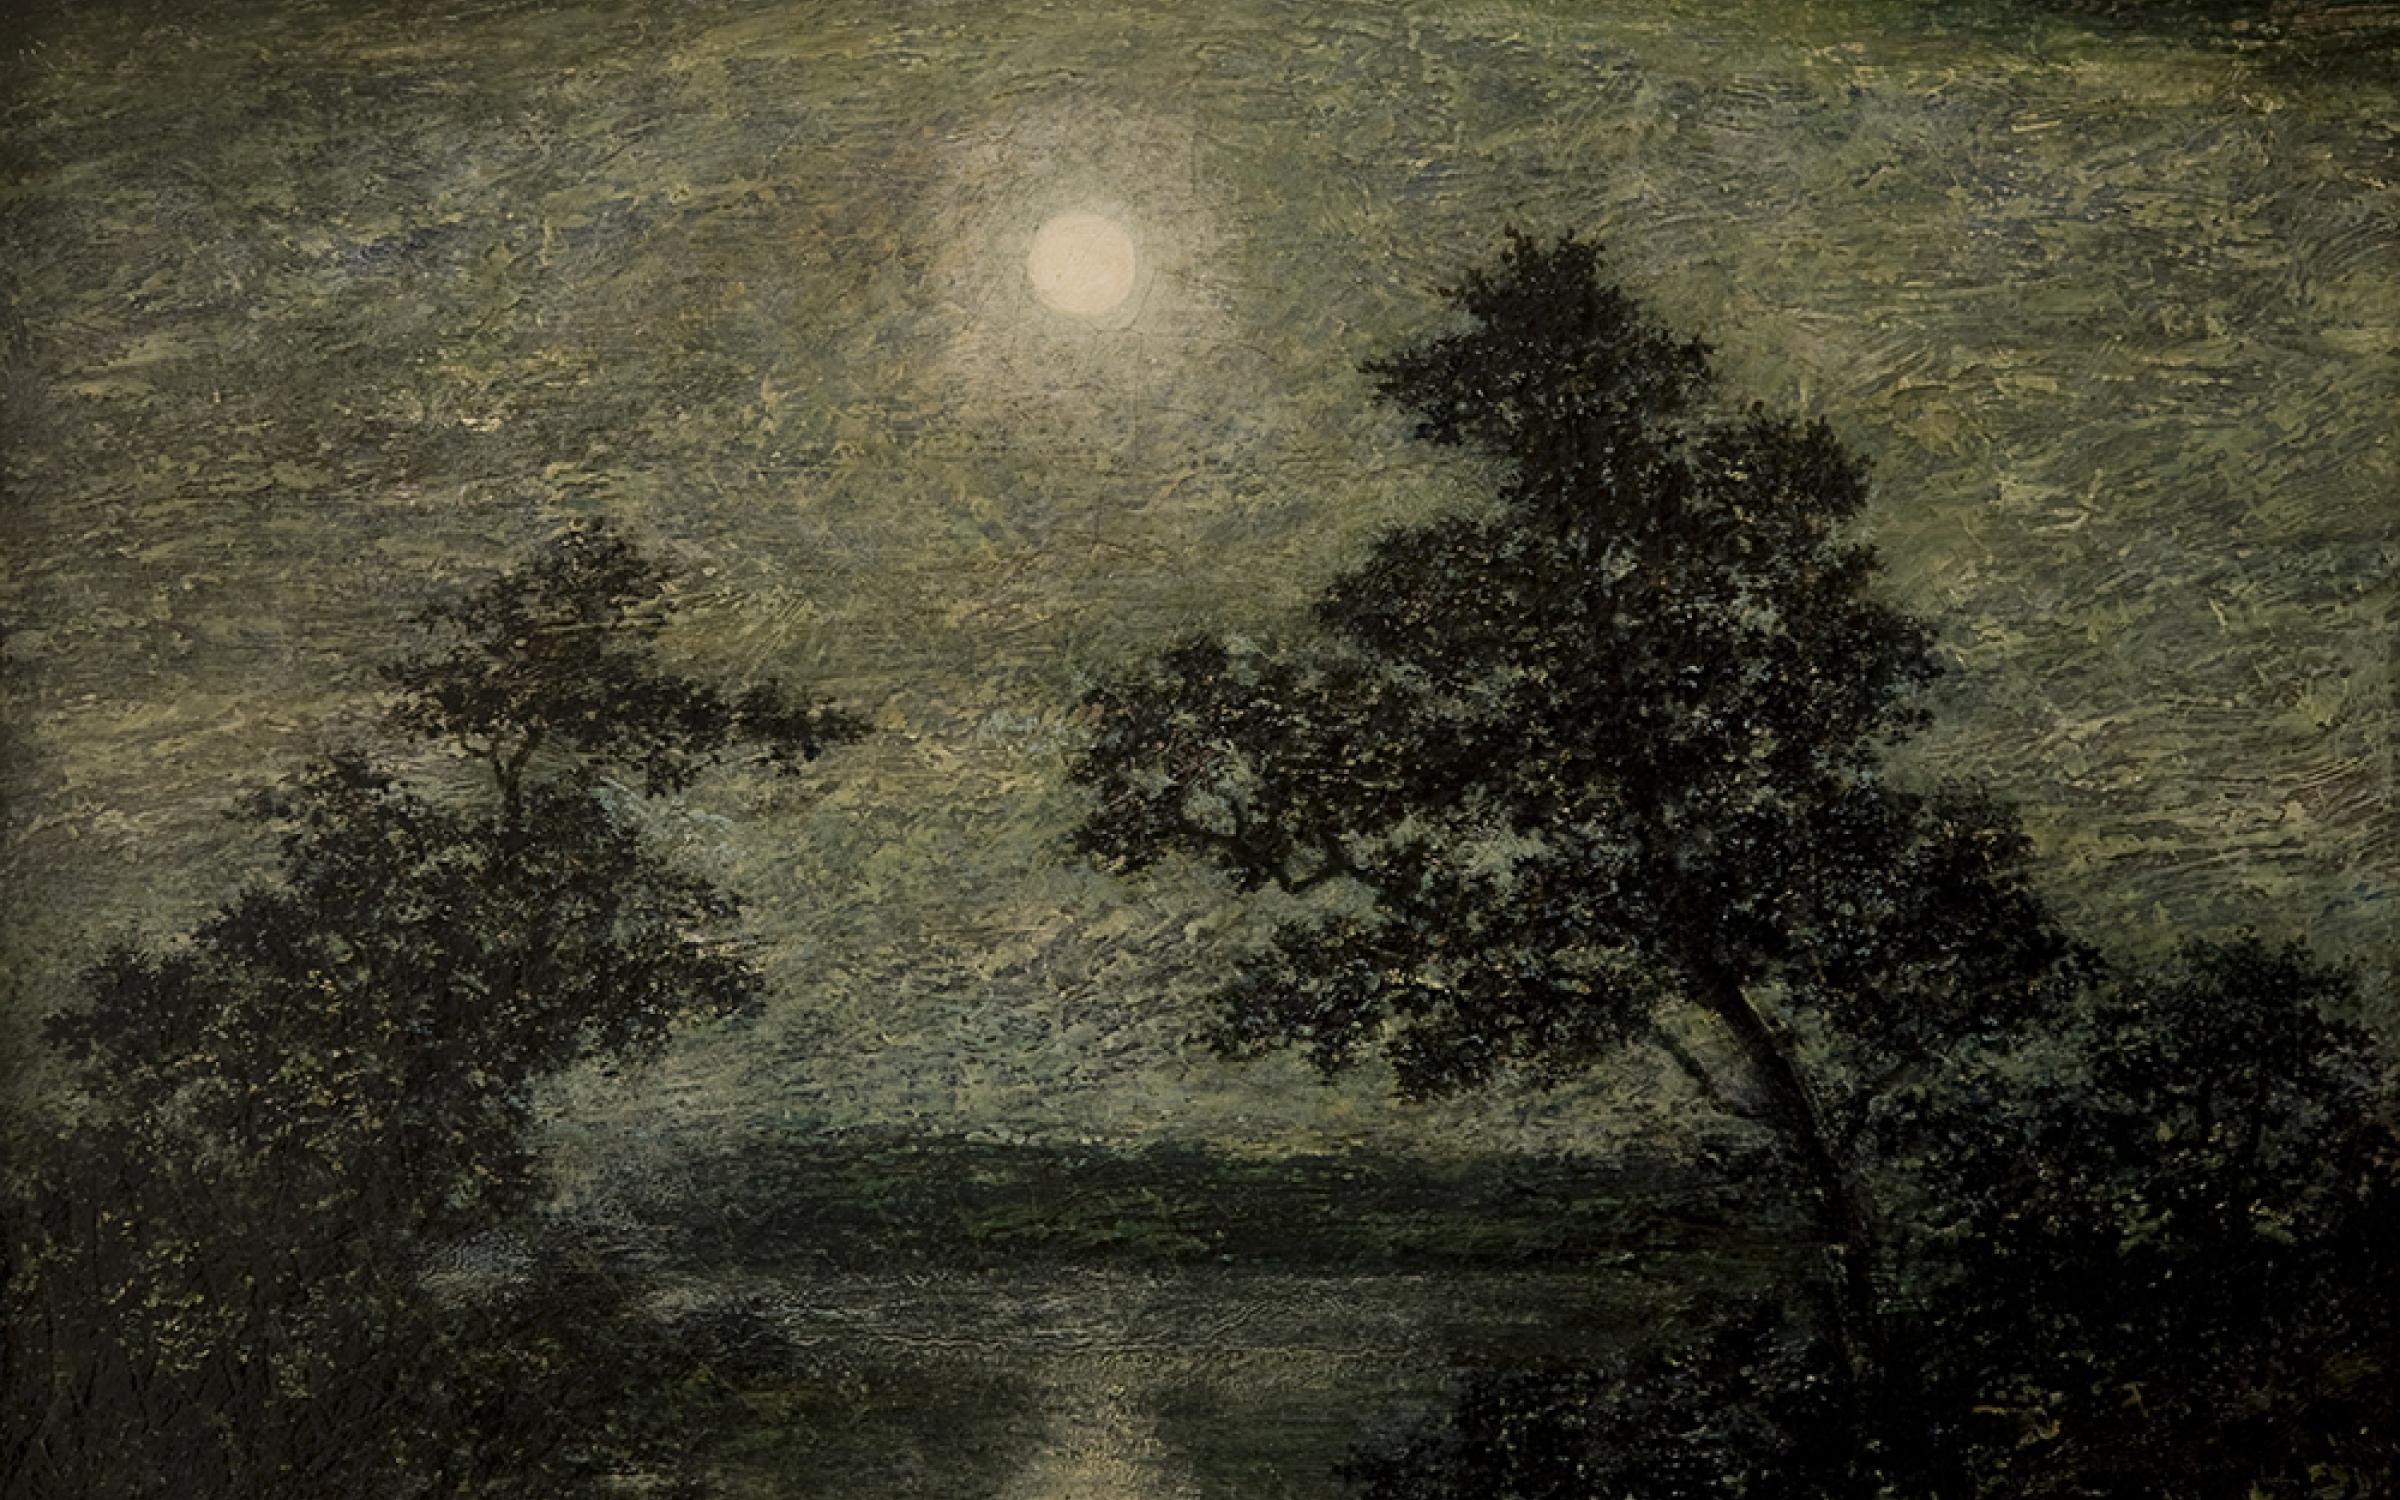 Ralph Albert Blakelock ( American, 1847-1919), Silvery Night, ca. 19th century, oil on canvas, gift of Marion Sharp Robinson, conserved with funds from the Ann K. Stewart Docent and Volunteer Conservation Fund, UMFA1953.013